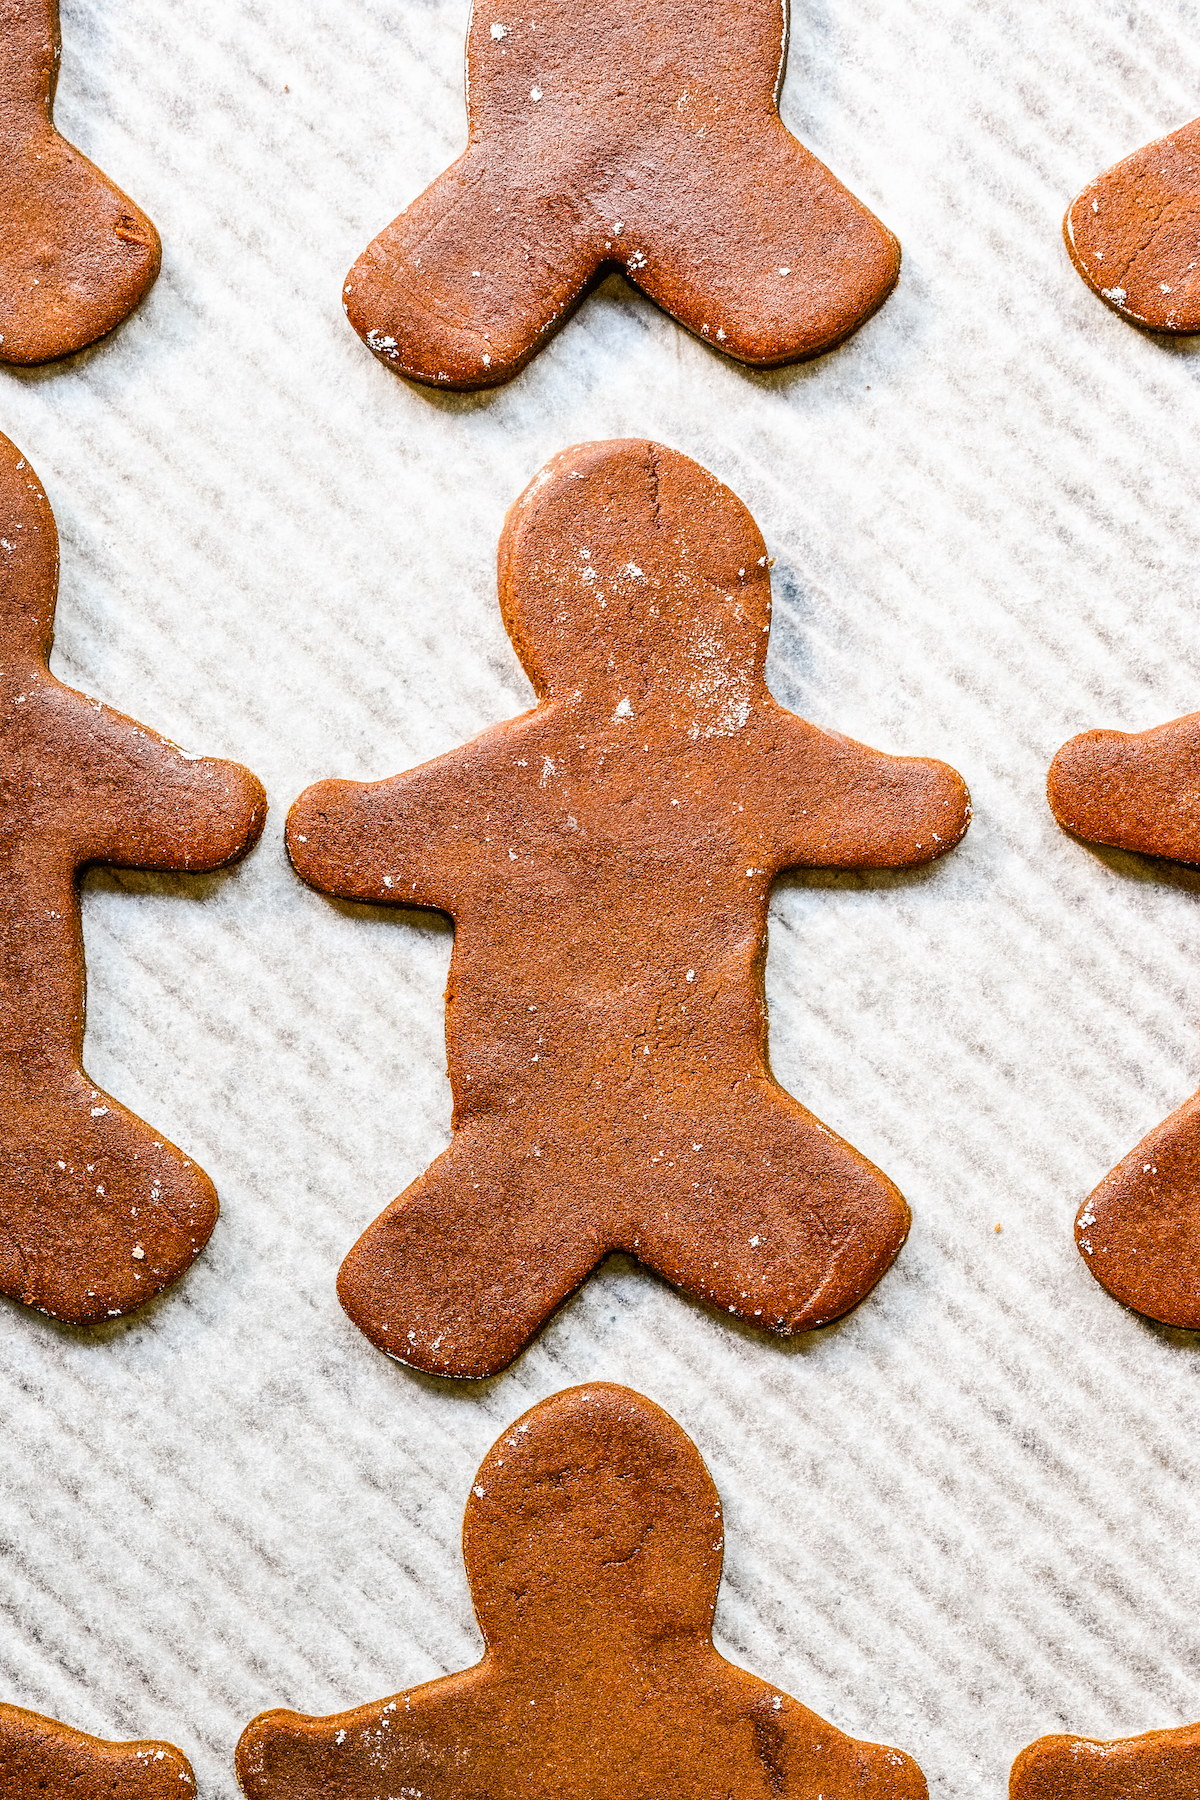 Unbaked gingerbread men on a cookie sheet.